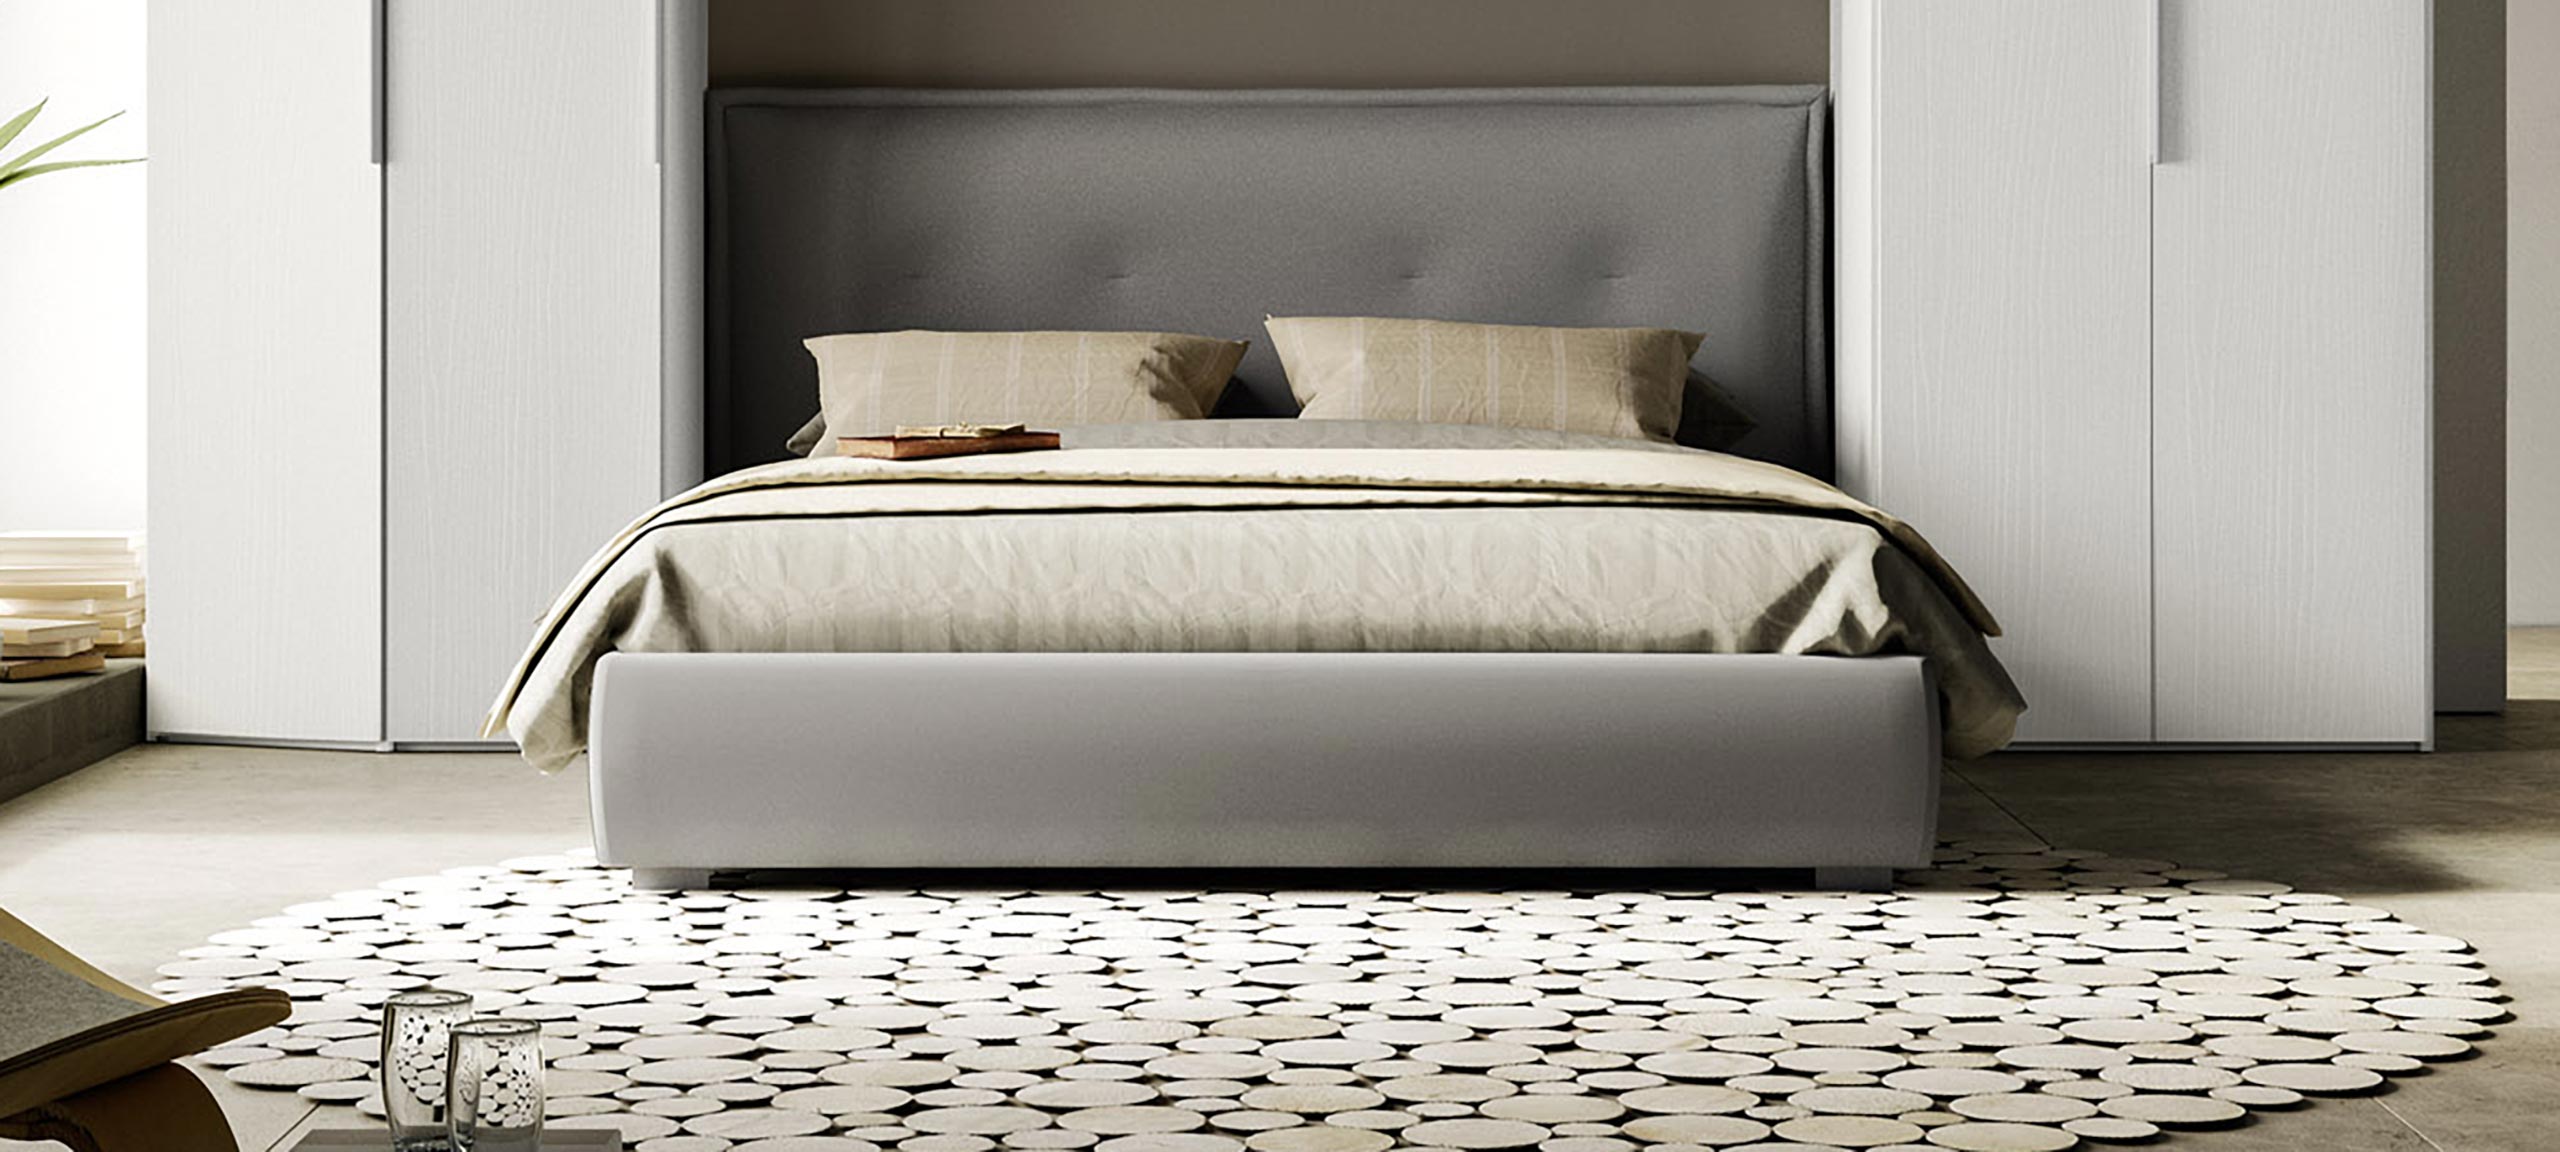 fabric-lined double bed with container 5